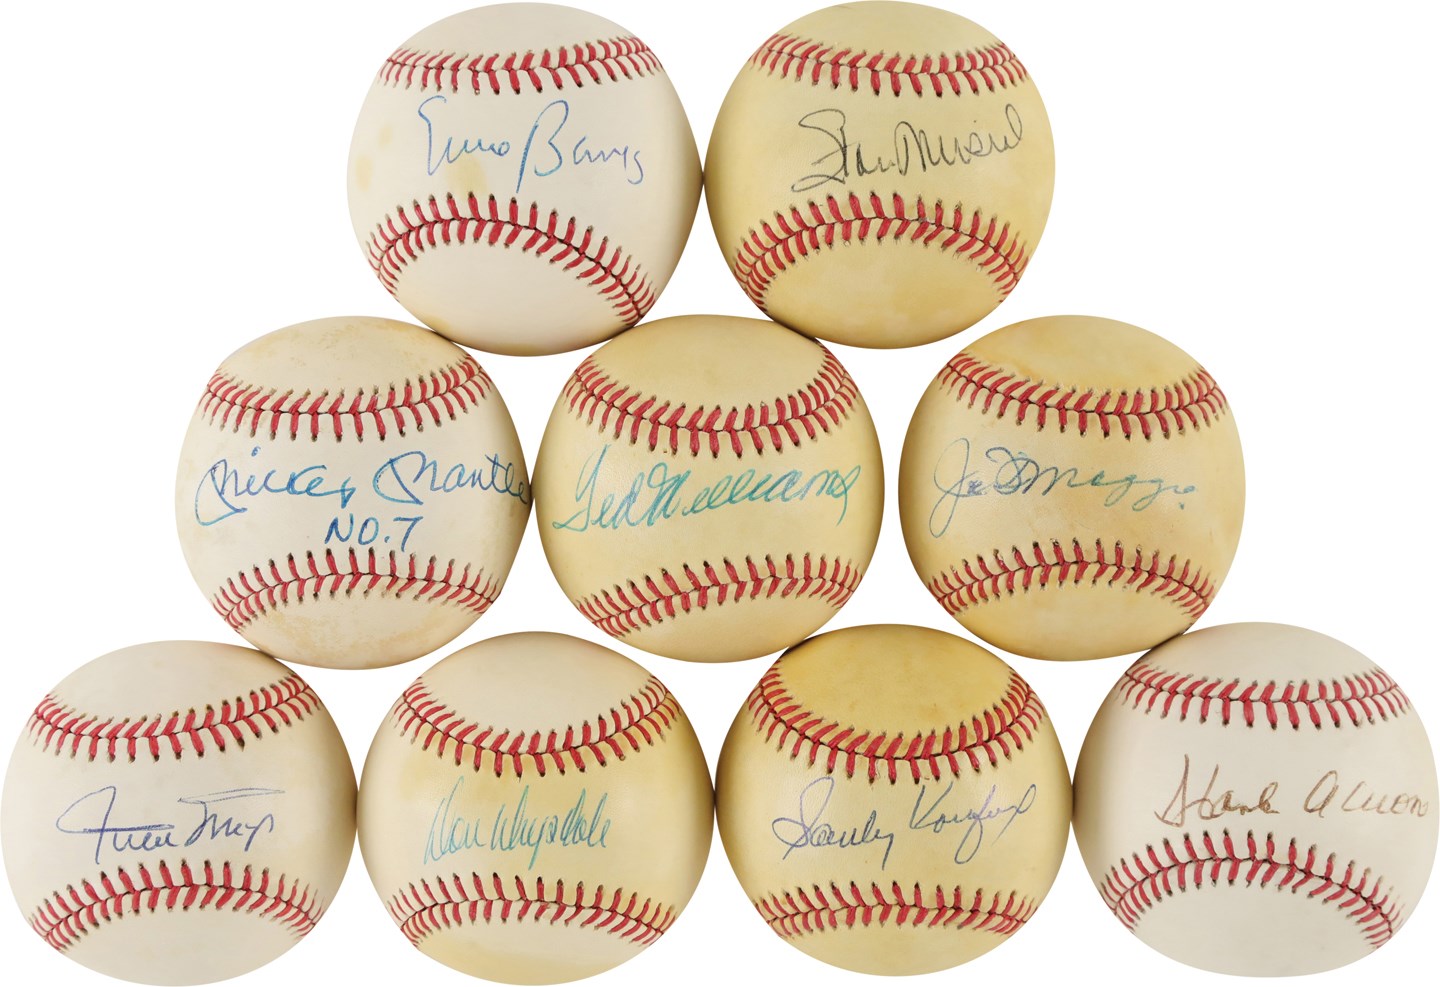 - Hall of Famers & Stars Signed Baseball Collection w/Mantle, DiMaggio & Williams (46)